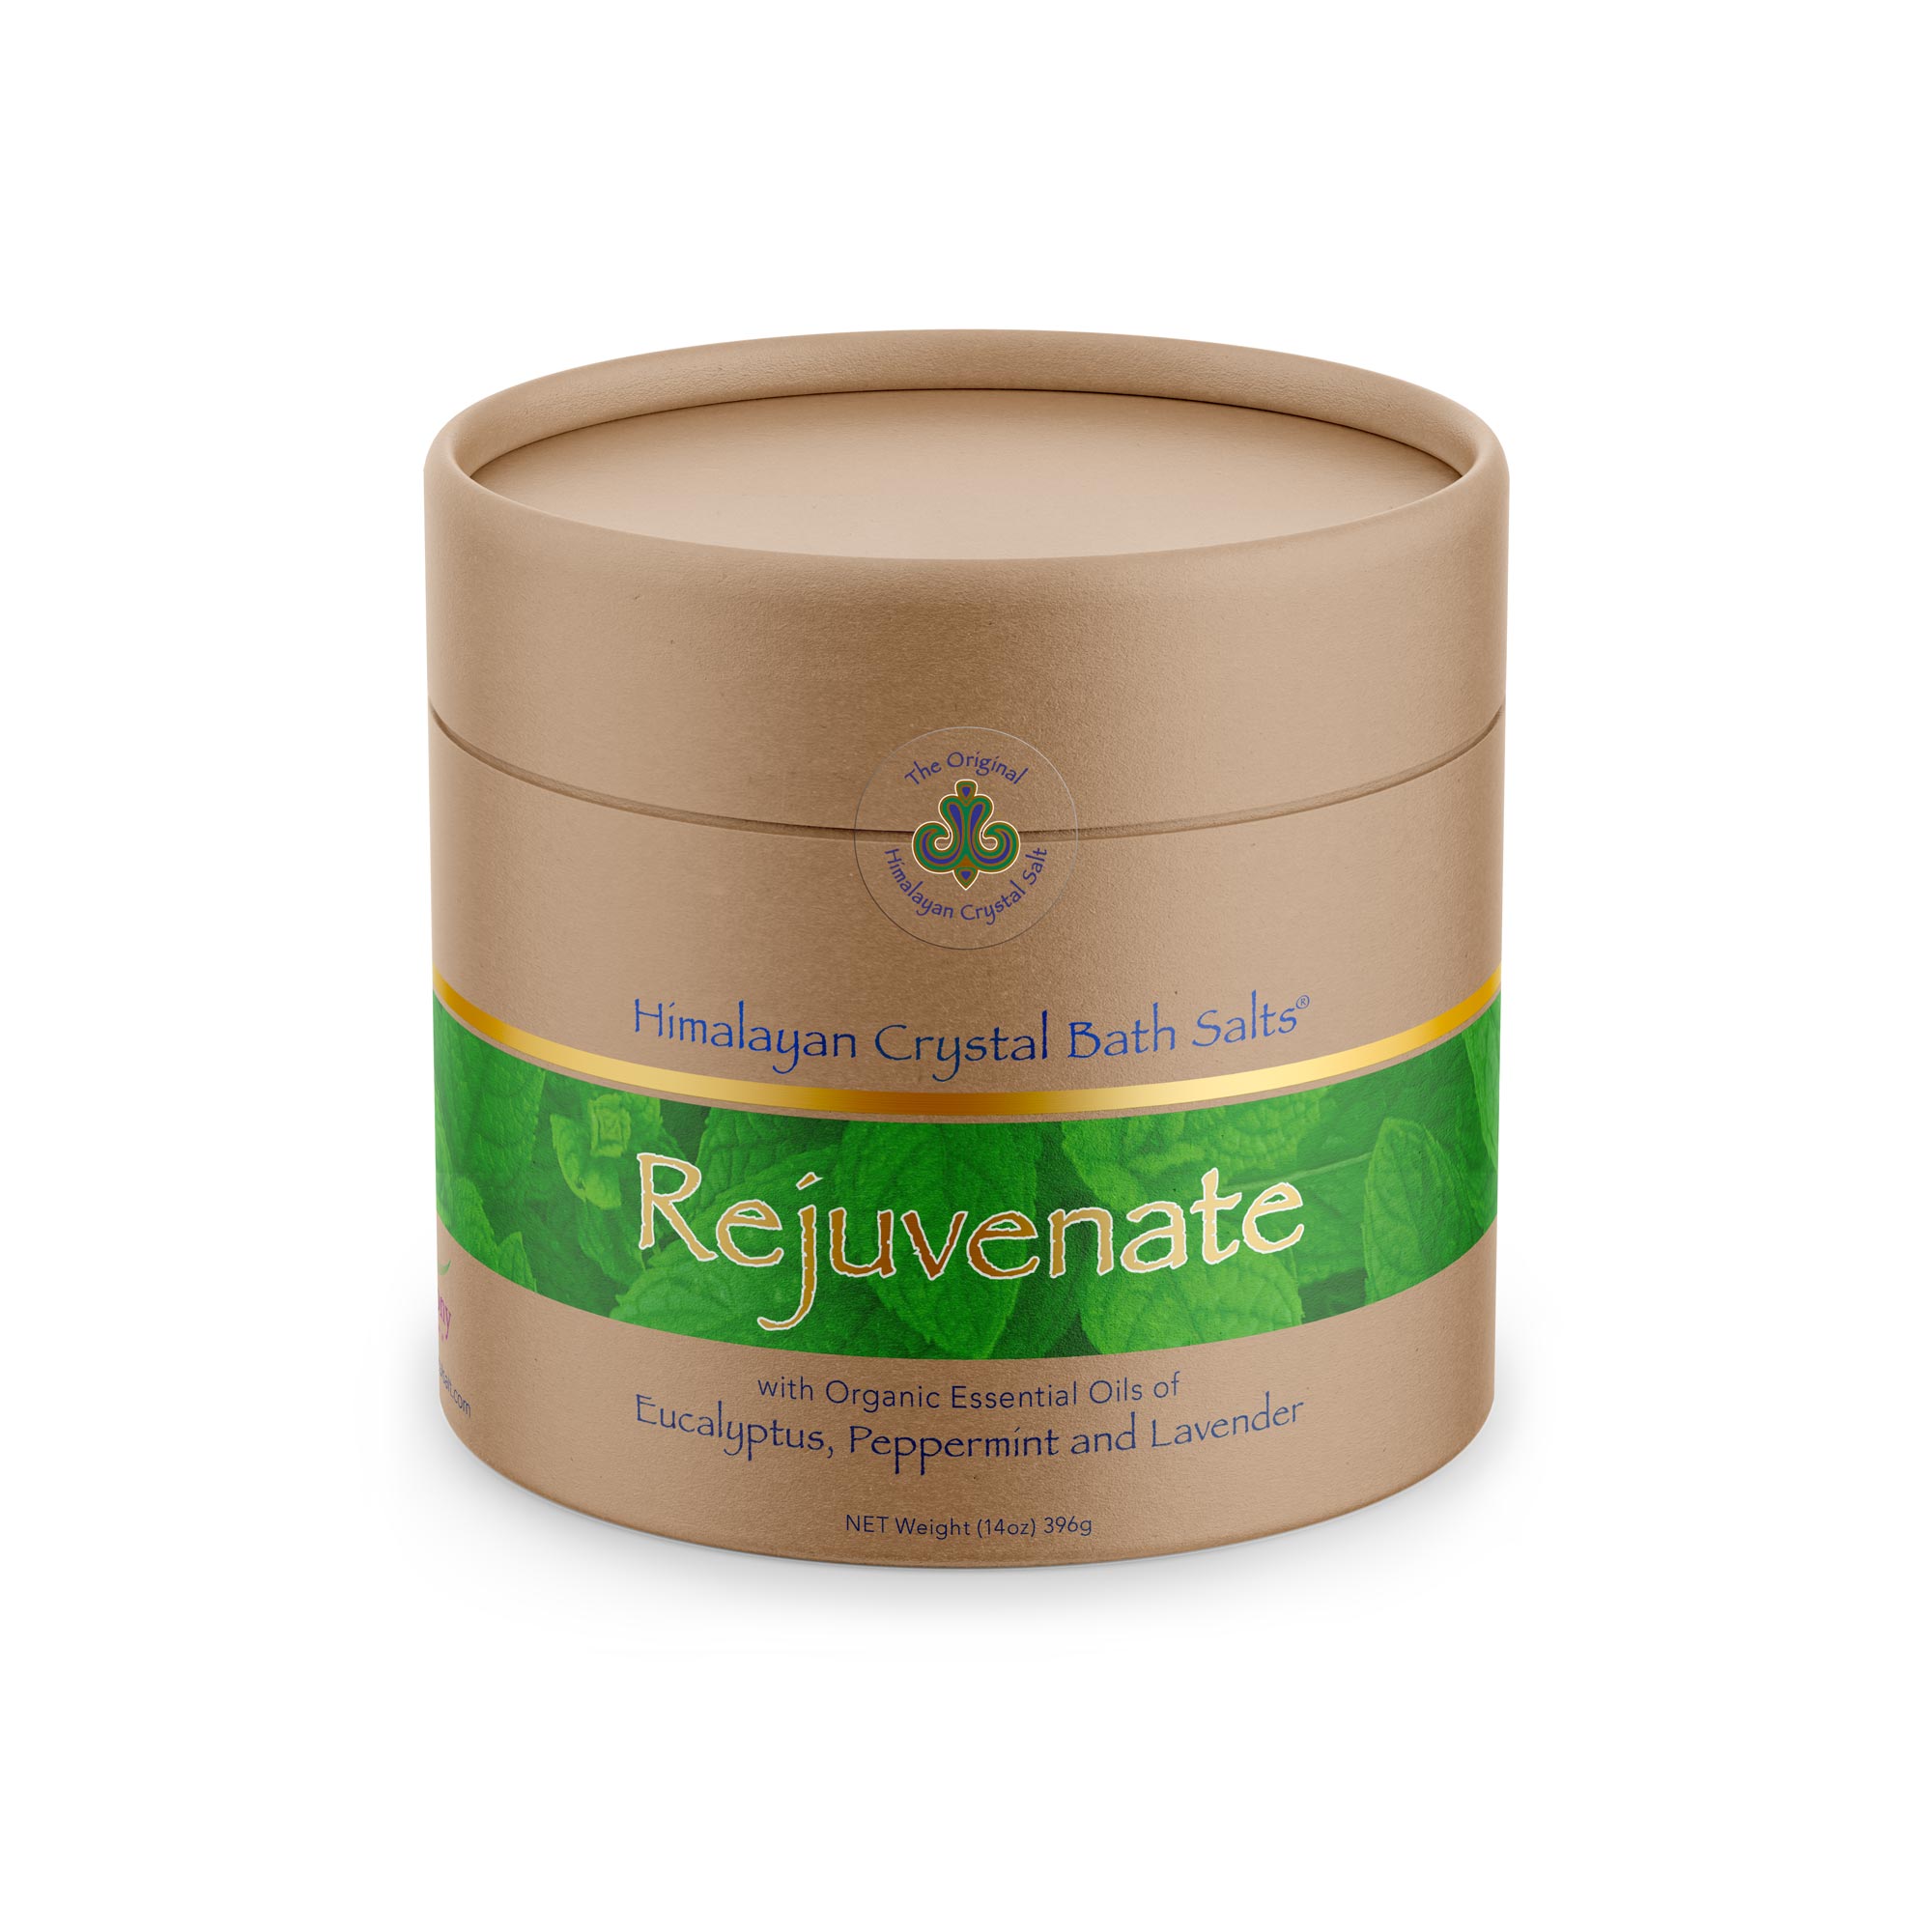 Rejuvenate with this pure bath salt blend of 100% organic eucalyptus, peppermint, and lavender essential oils.  This renewing scent helps soothe tight muscles, ease tension, and provides a deeply invigorating experience. 